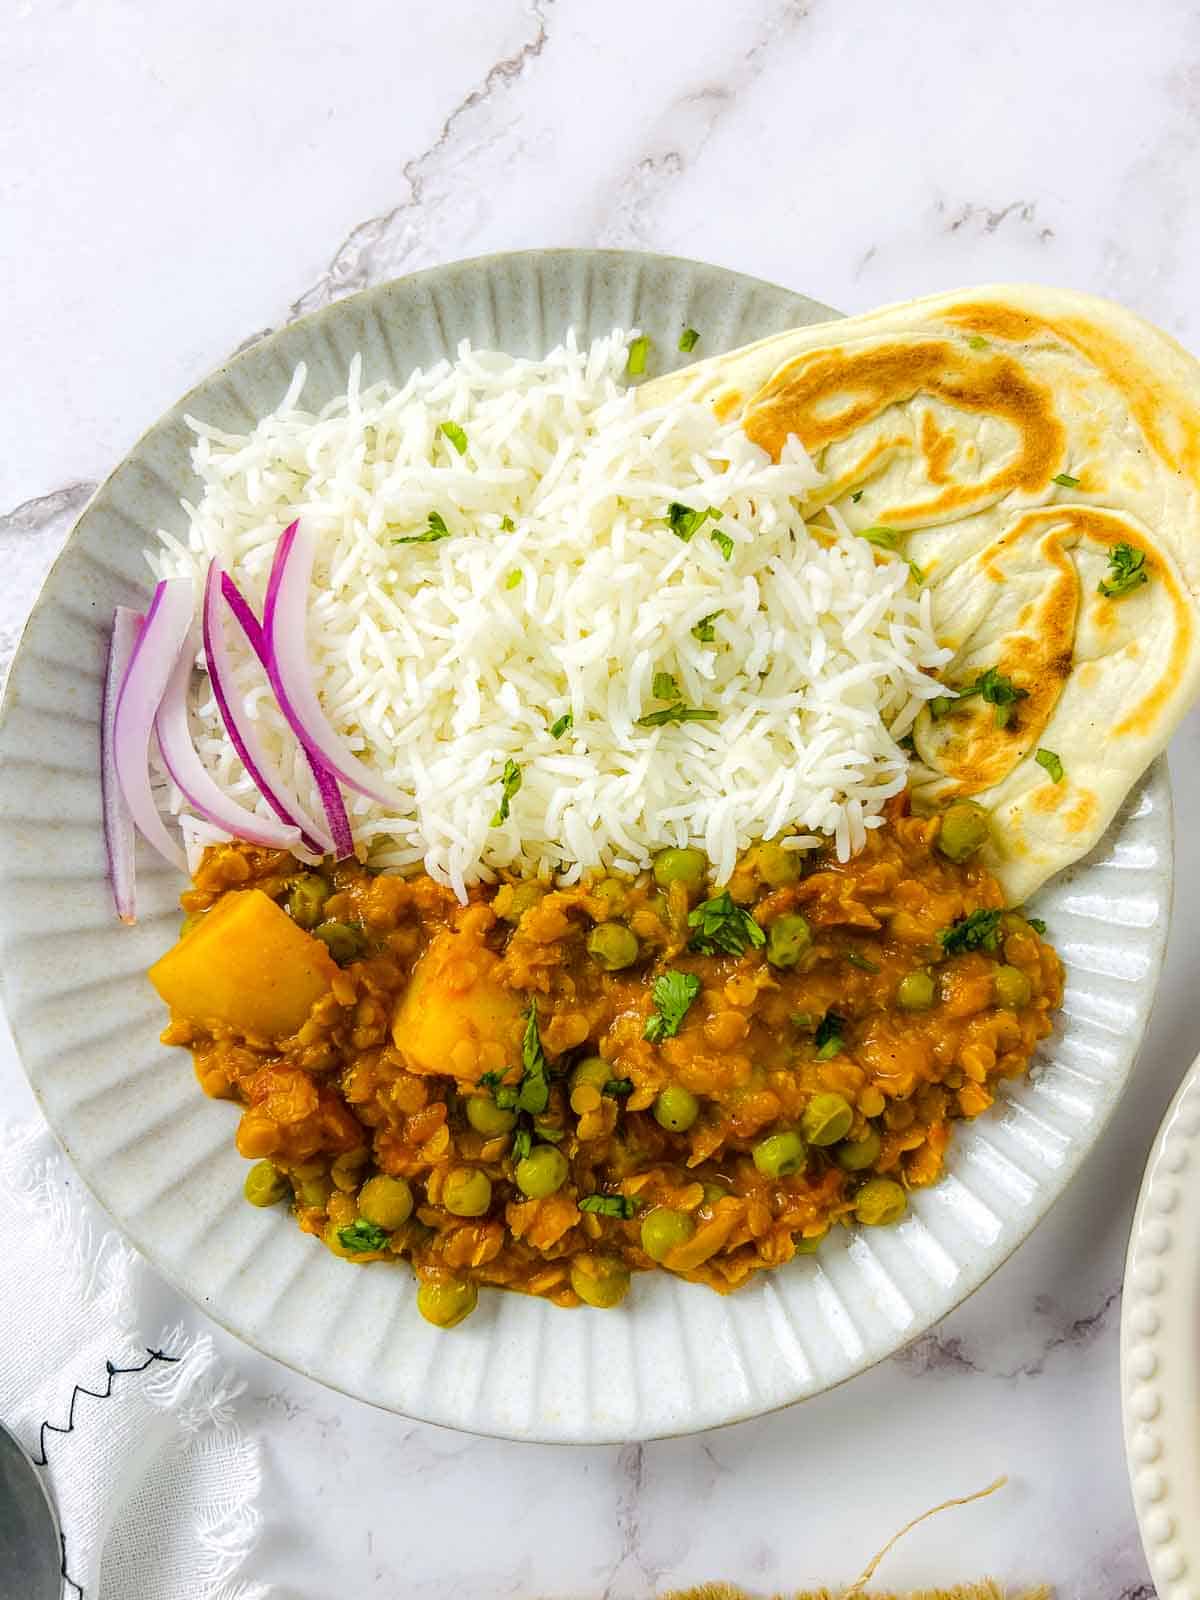 Lentil peas potato curry on a white plate served with rice, naan, and onion slices and garnished with cilantro.